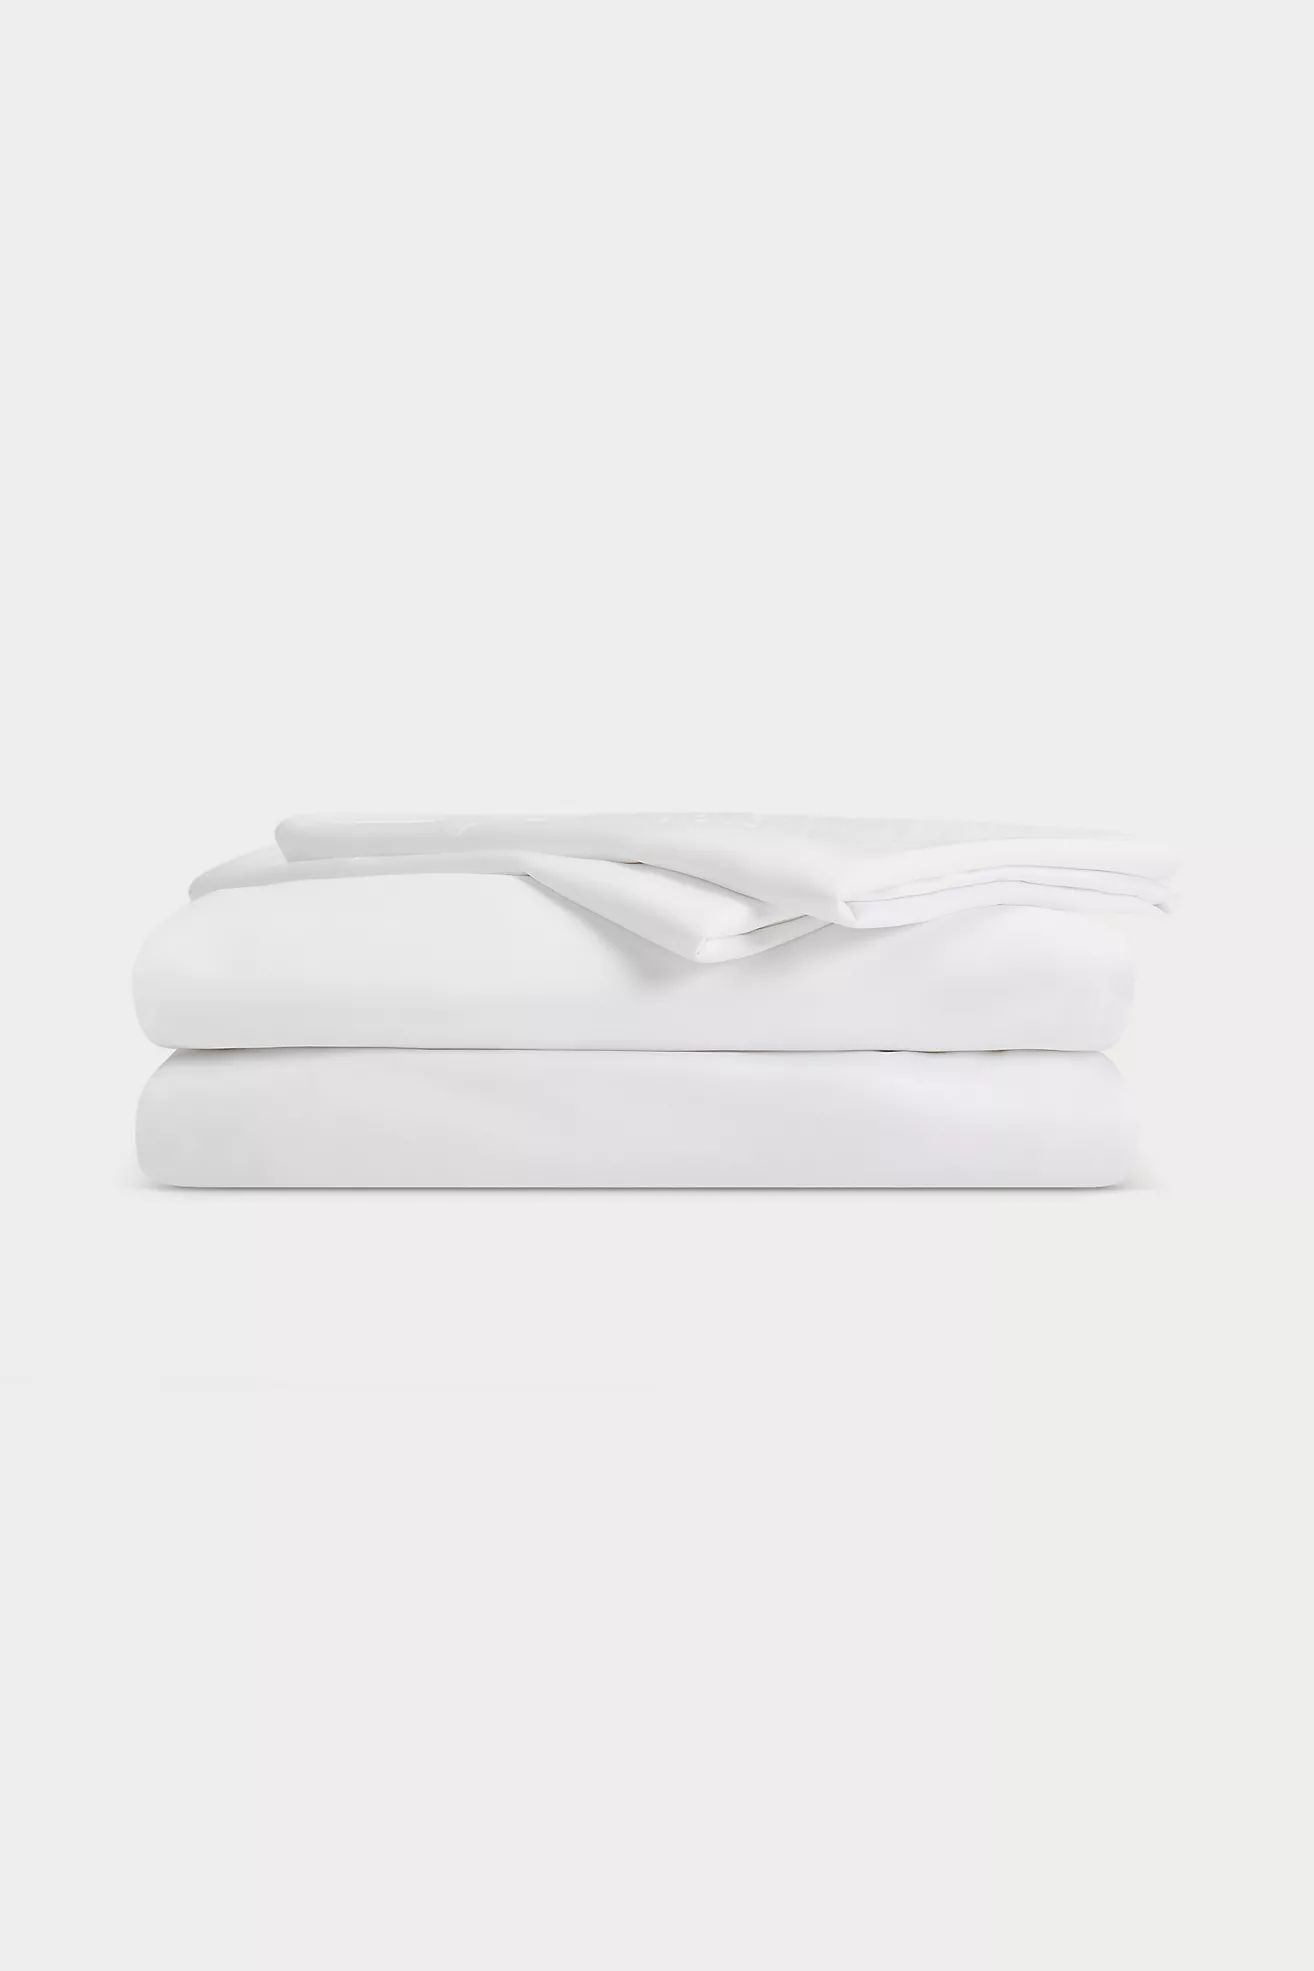 Cozy Earth Bamboo Sheet Set | Anthropologie (US)